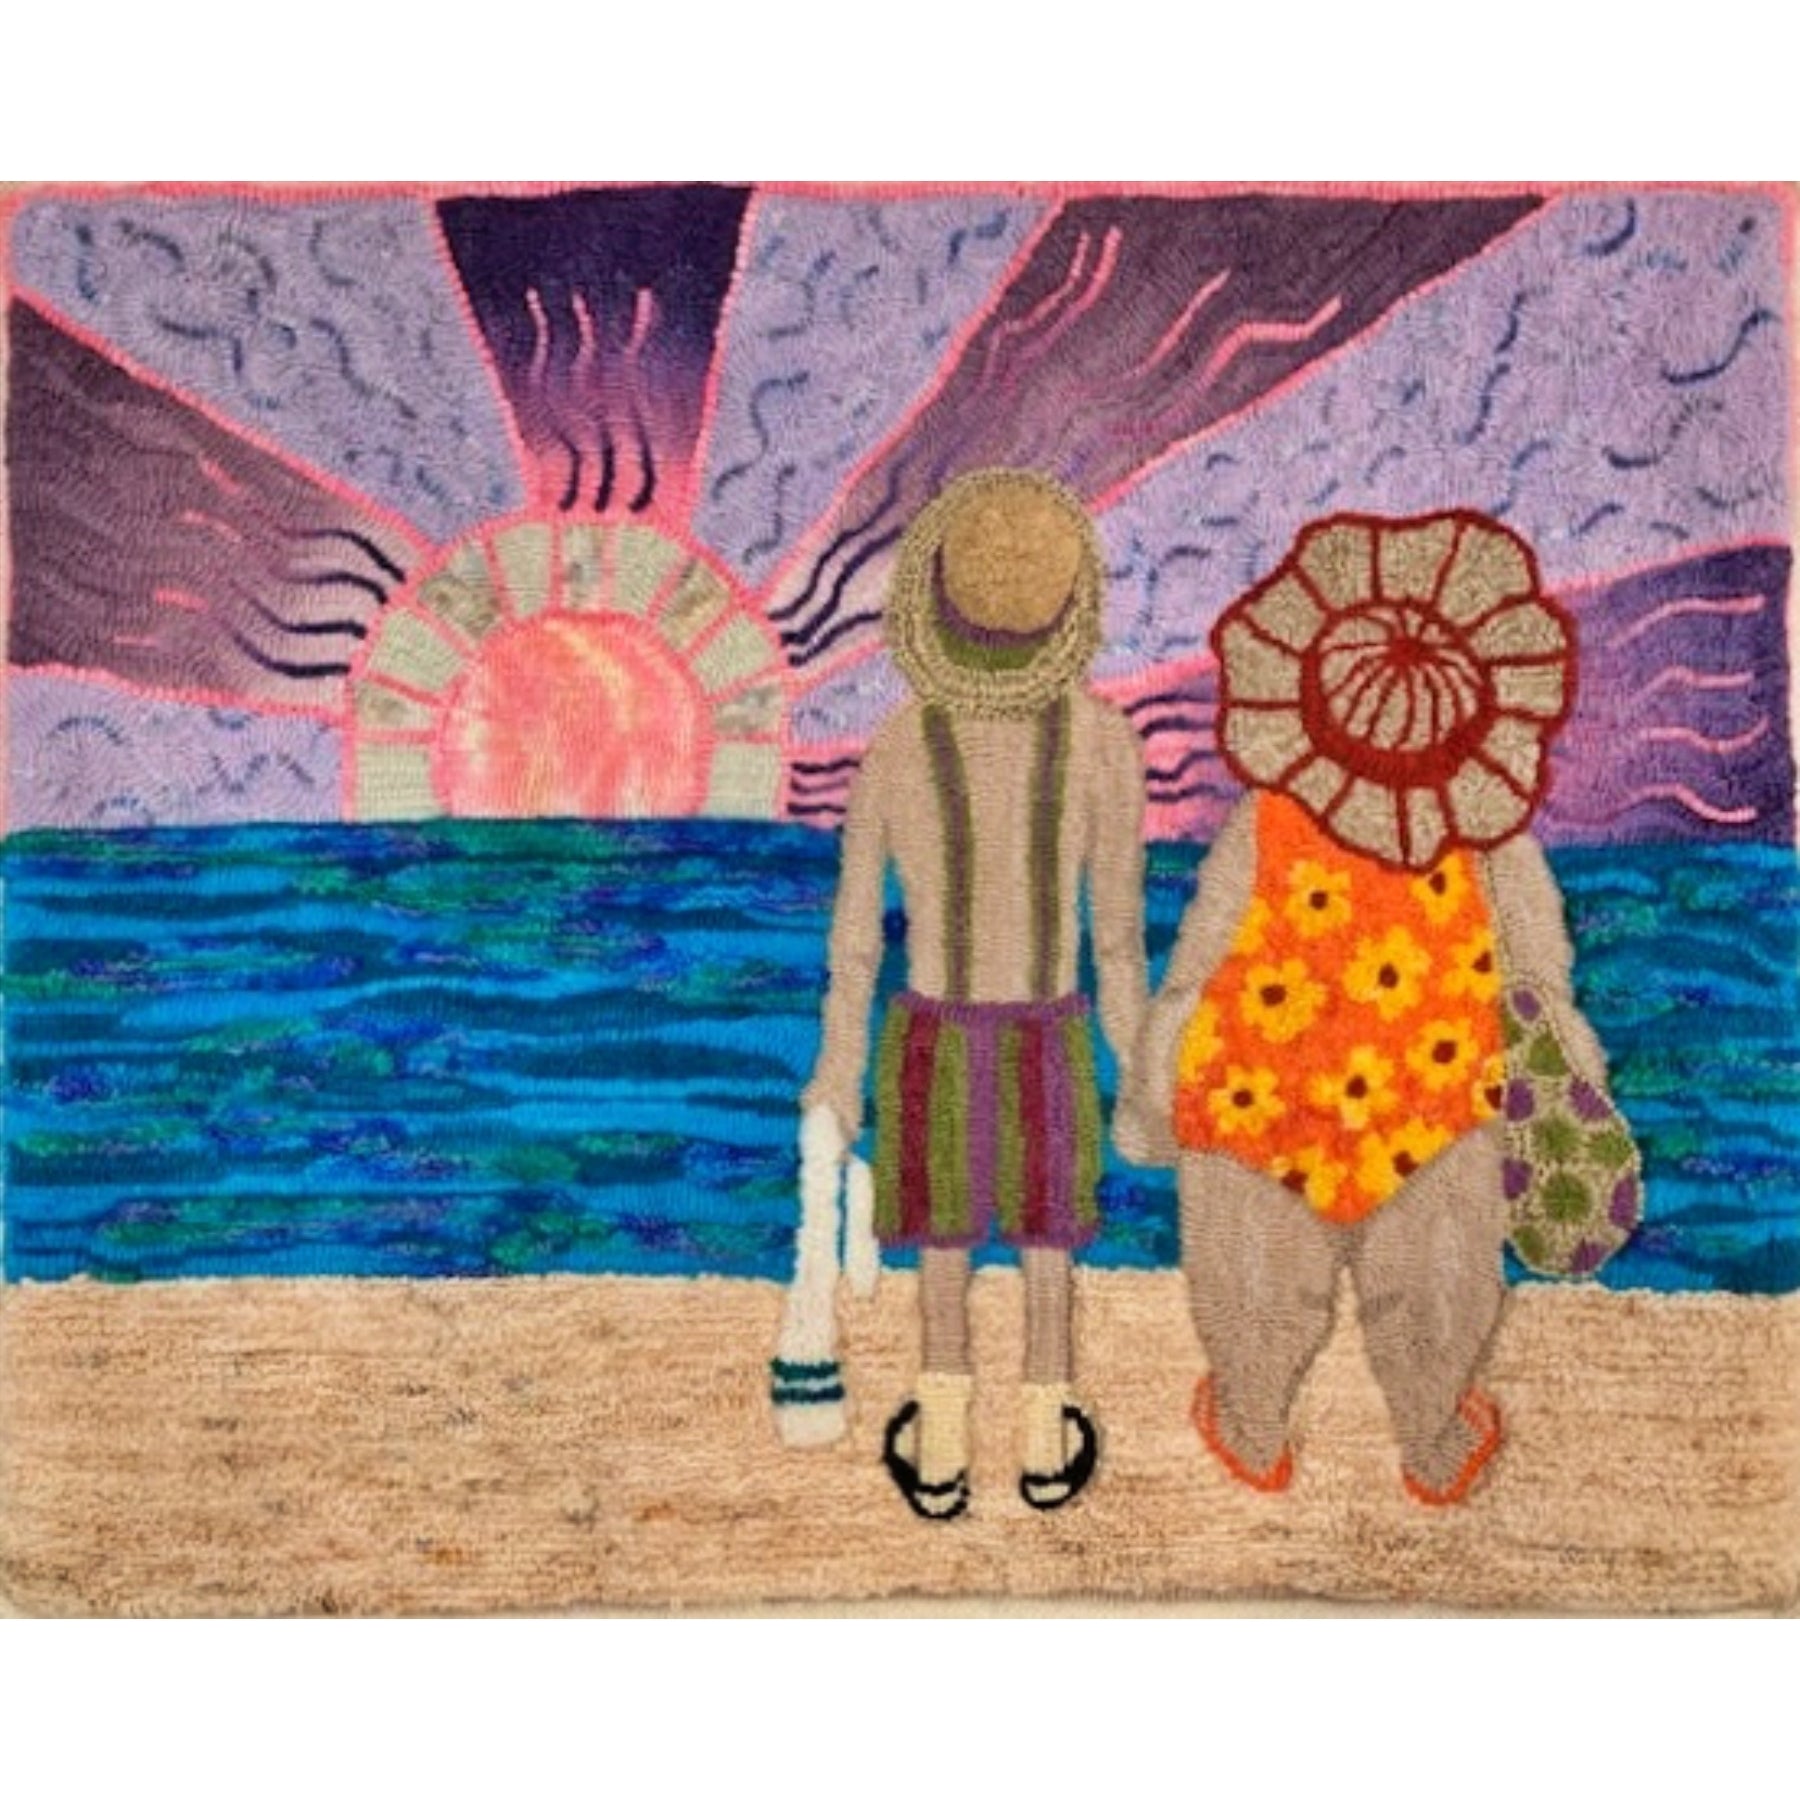 Sunset Moment, rug hooked by Beth Westbrook